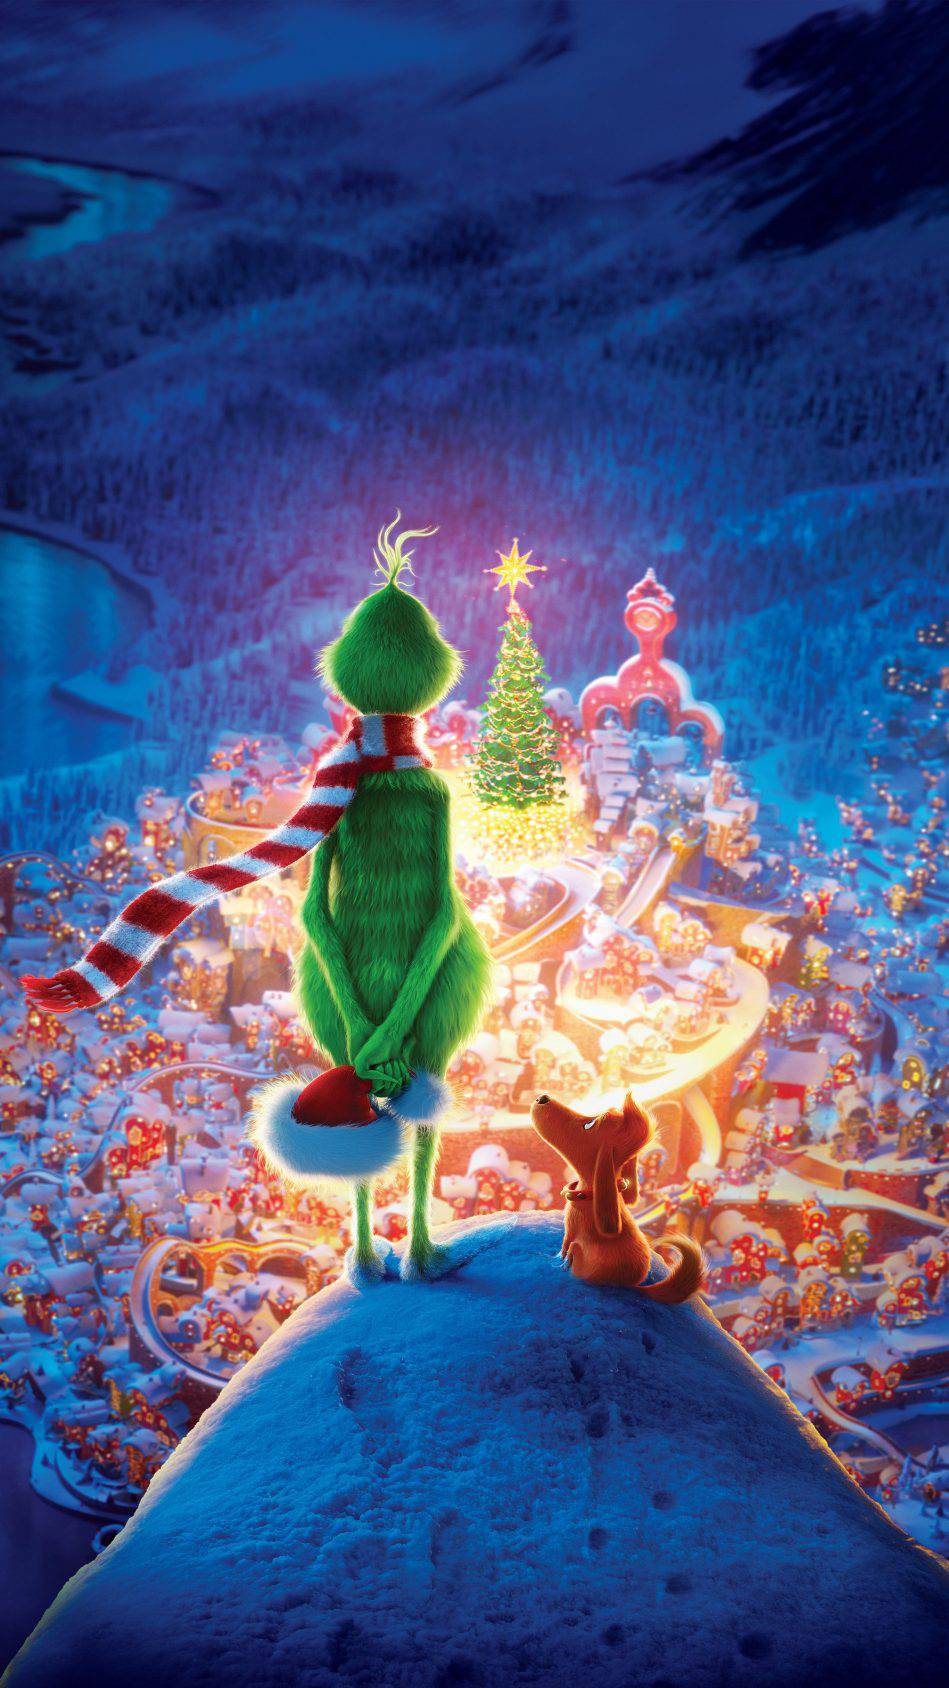 The Grinch Christmas iPhone Wallpaper